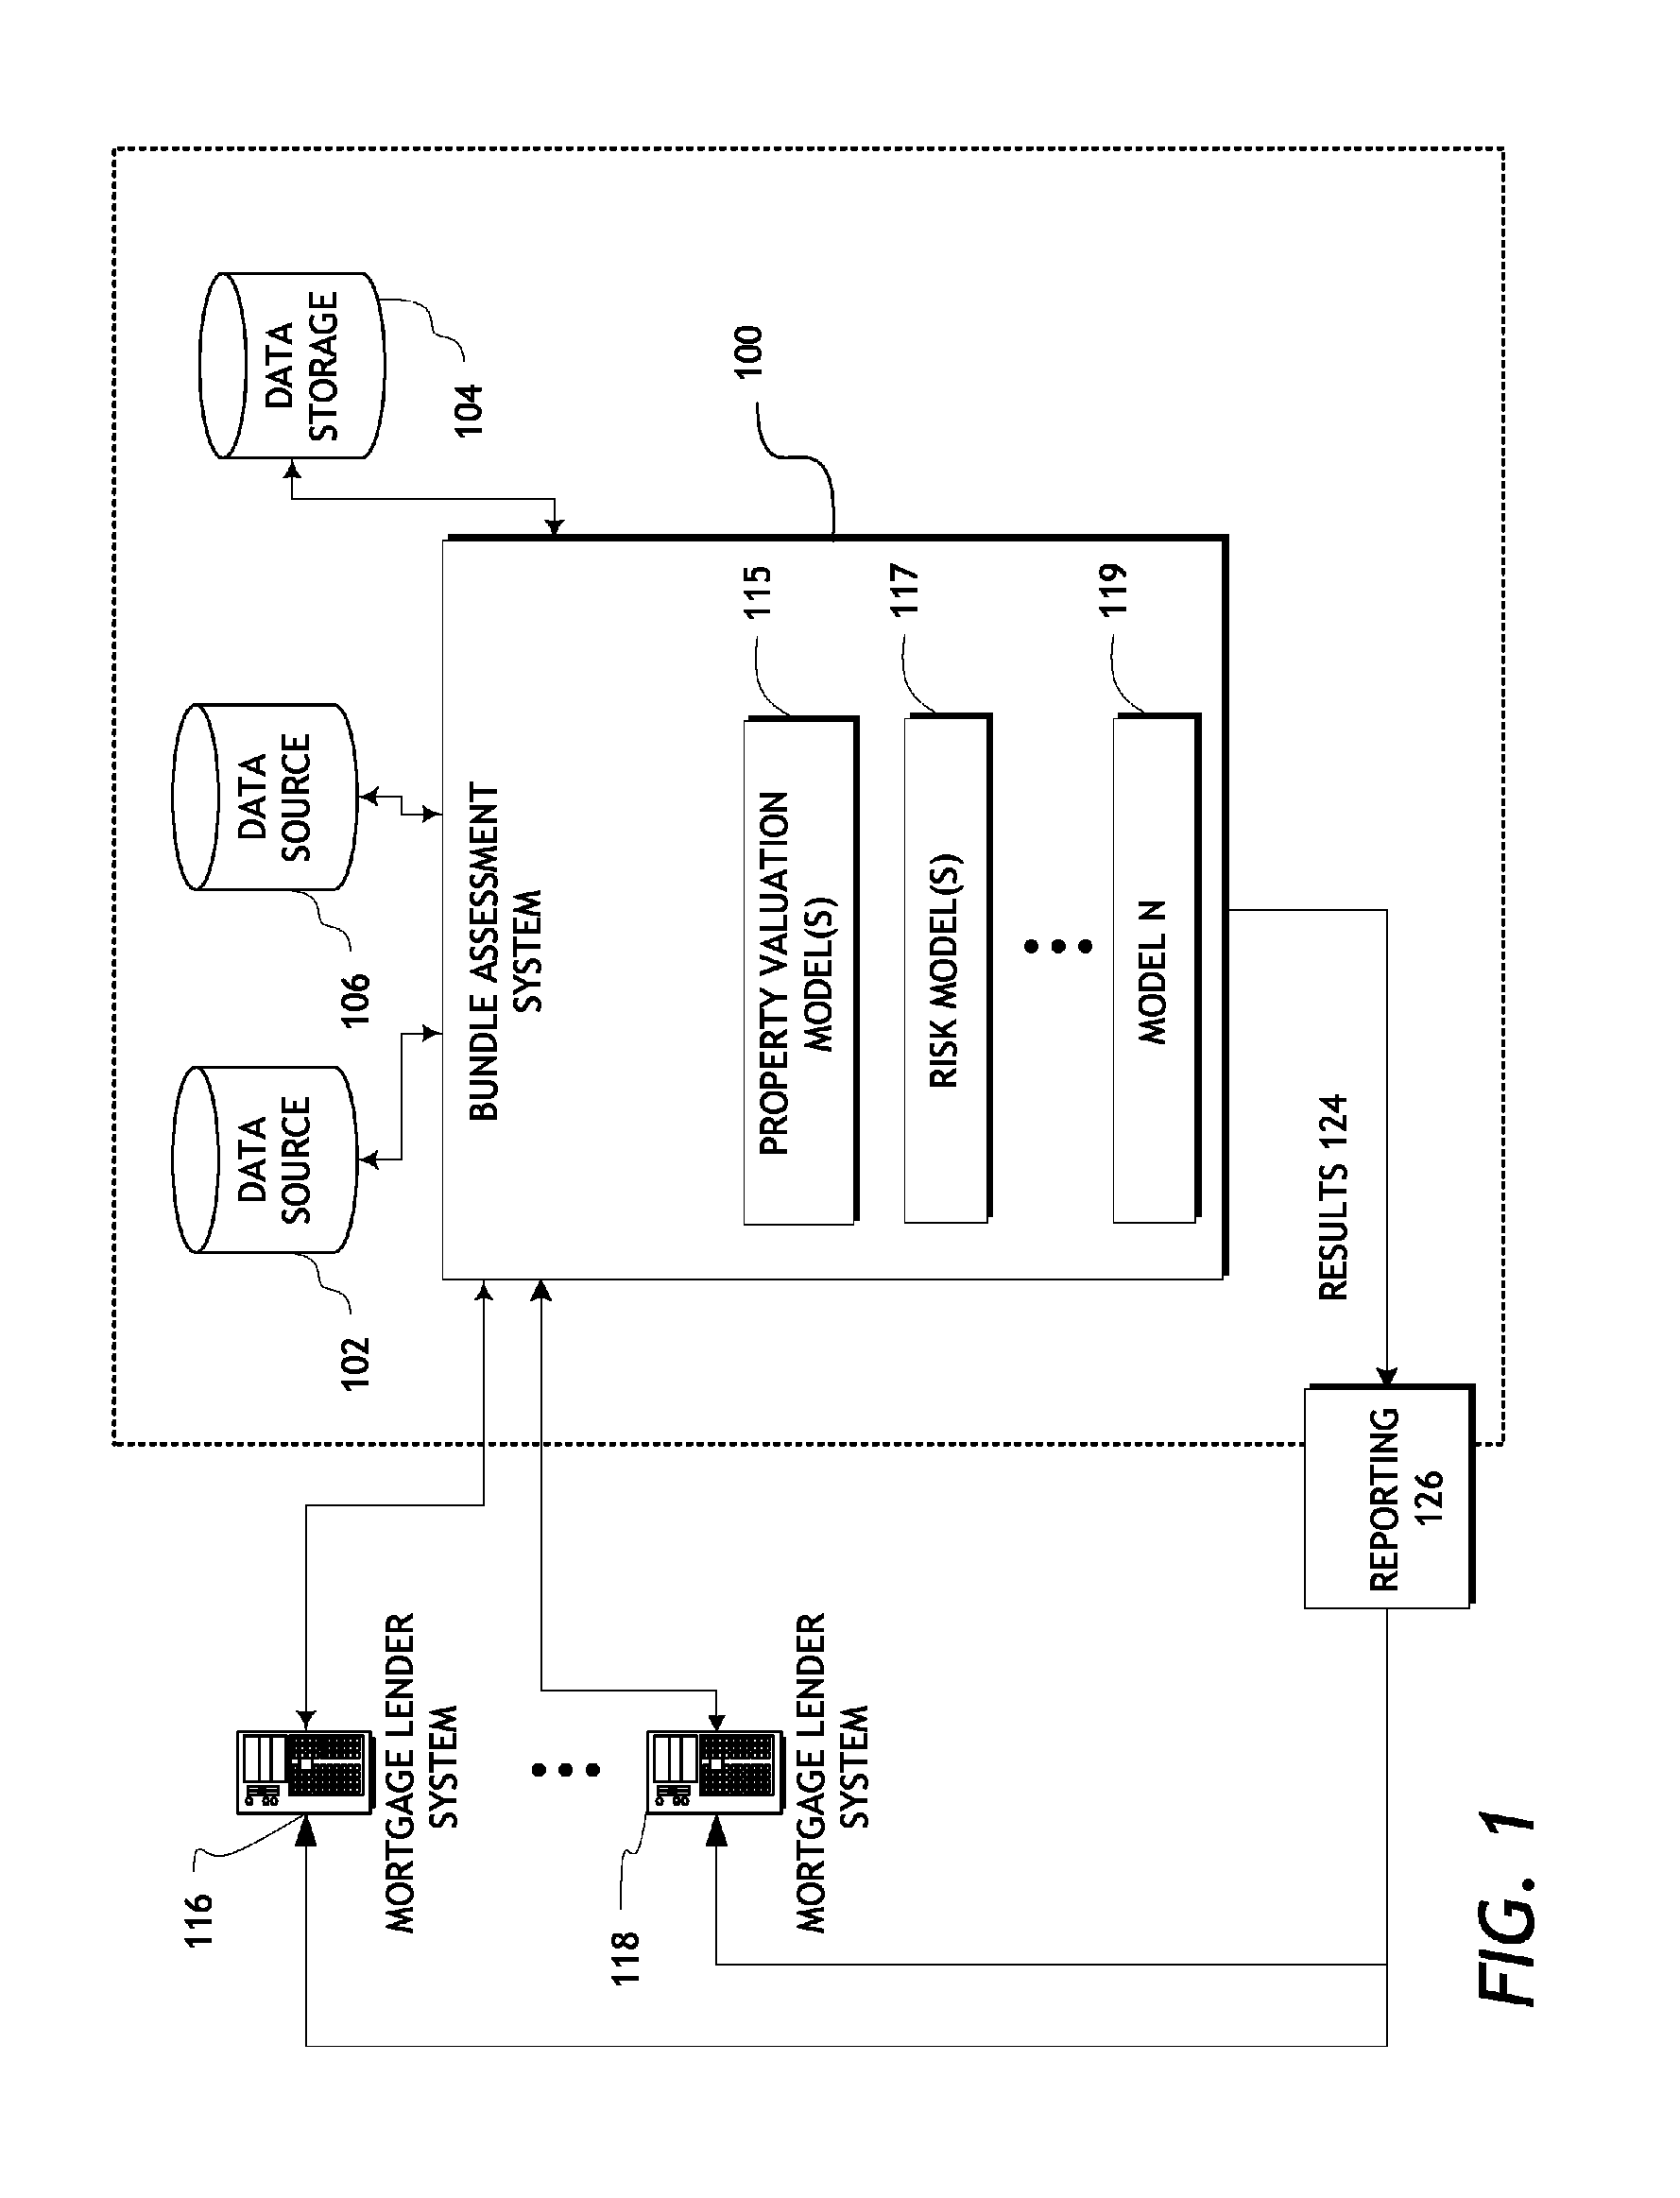 Systems and methods for facilitating financial transactions involving bundles of properties